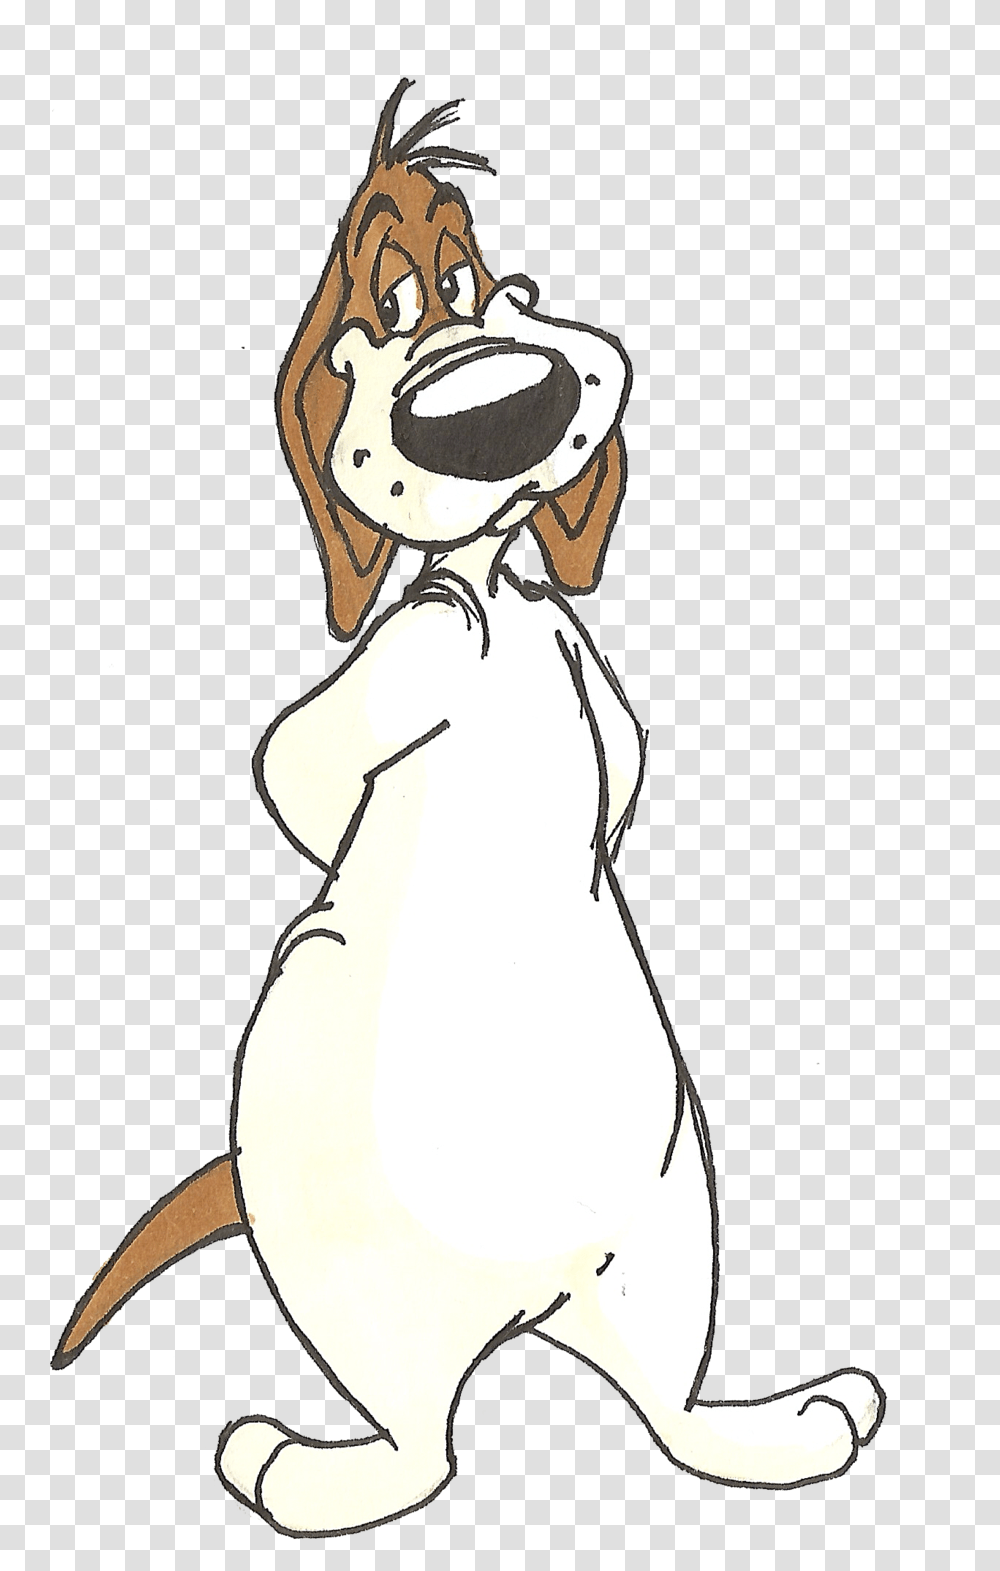 Gallery For Arthuraposs Sylvester The Cat, Drawing, Sketch, Hand, Performer Transparent Png